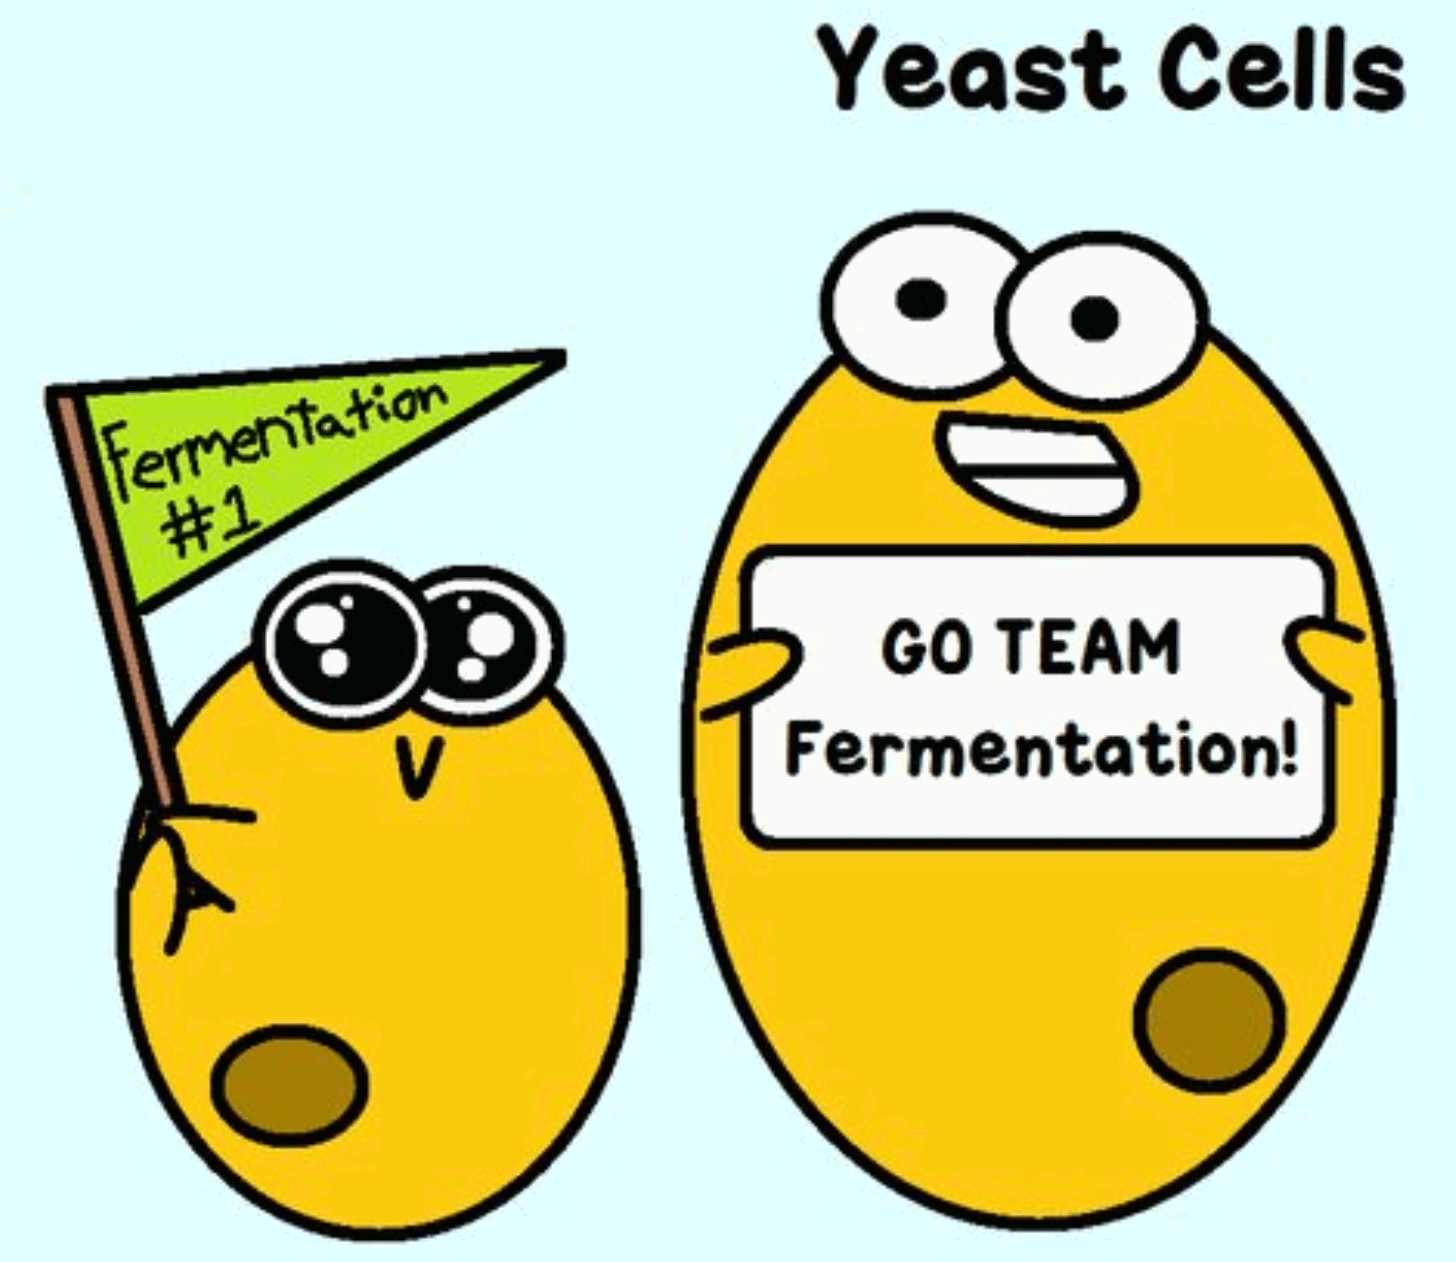 Fermentation,  or how to blow up a balloon with yeast!